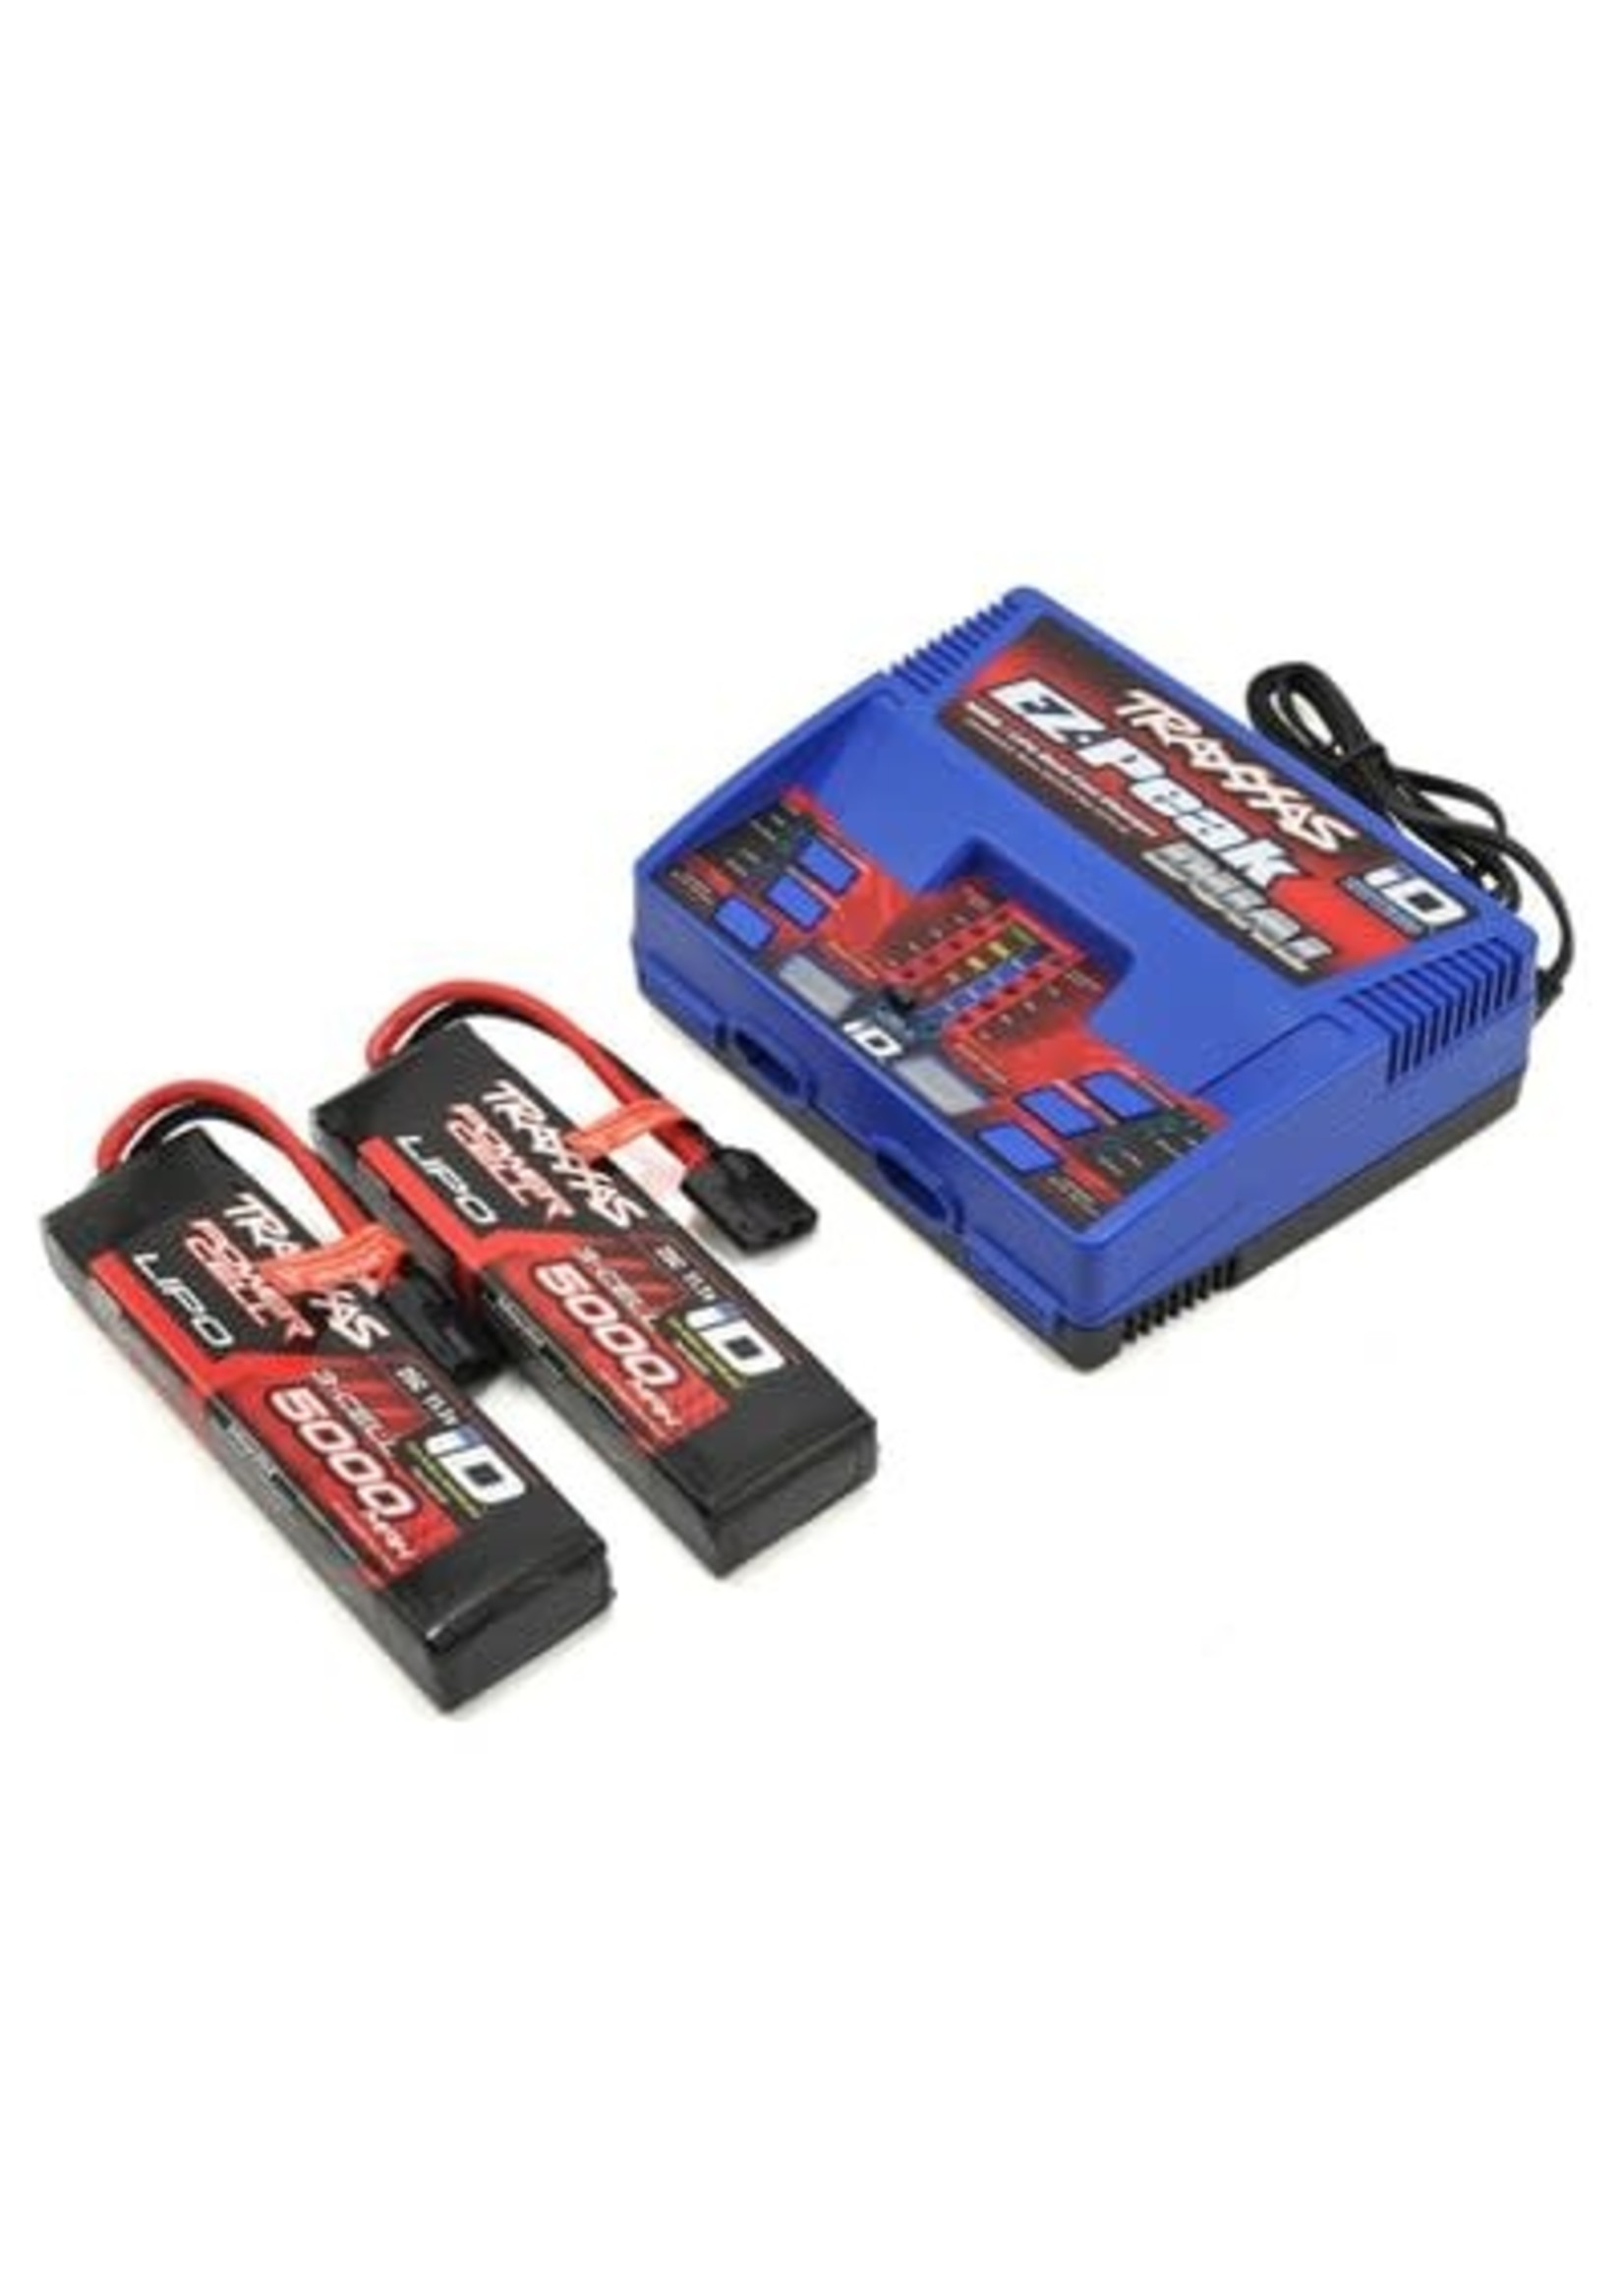 Traxxas 2990 Battery/charger completer pack (includes #2972 Dual iD charger (1), #2872X 5000mAh 11.1V 3-cell 25C LiPo battery (2))